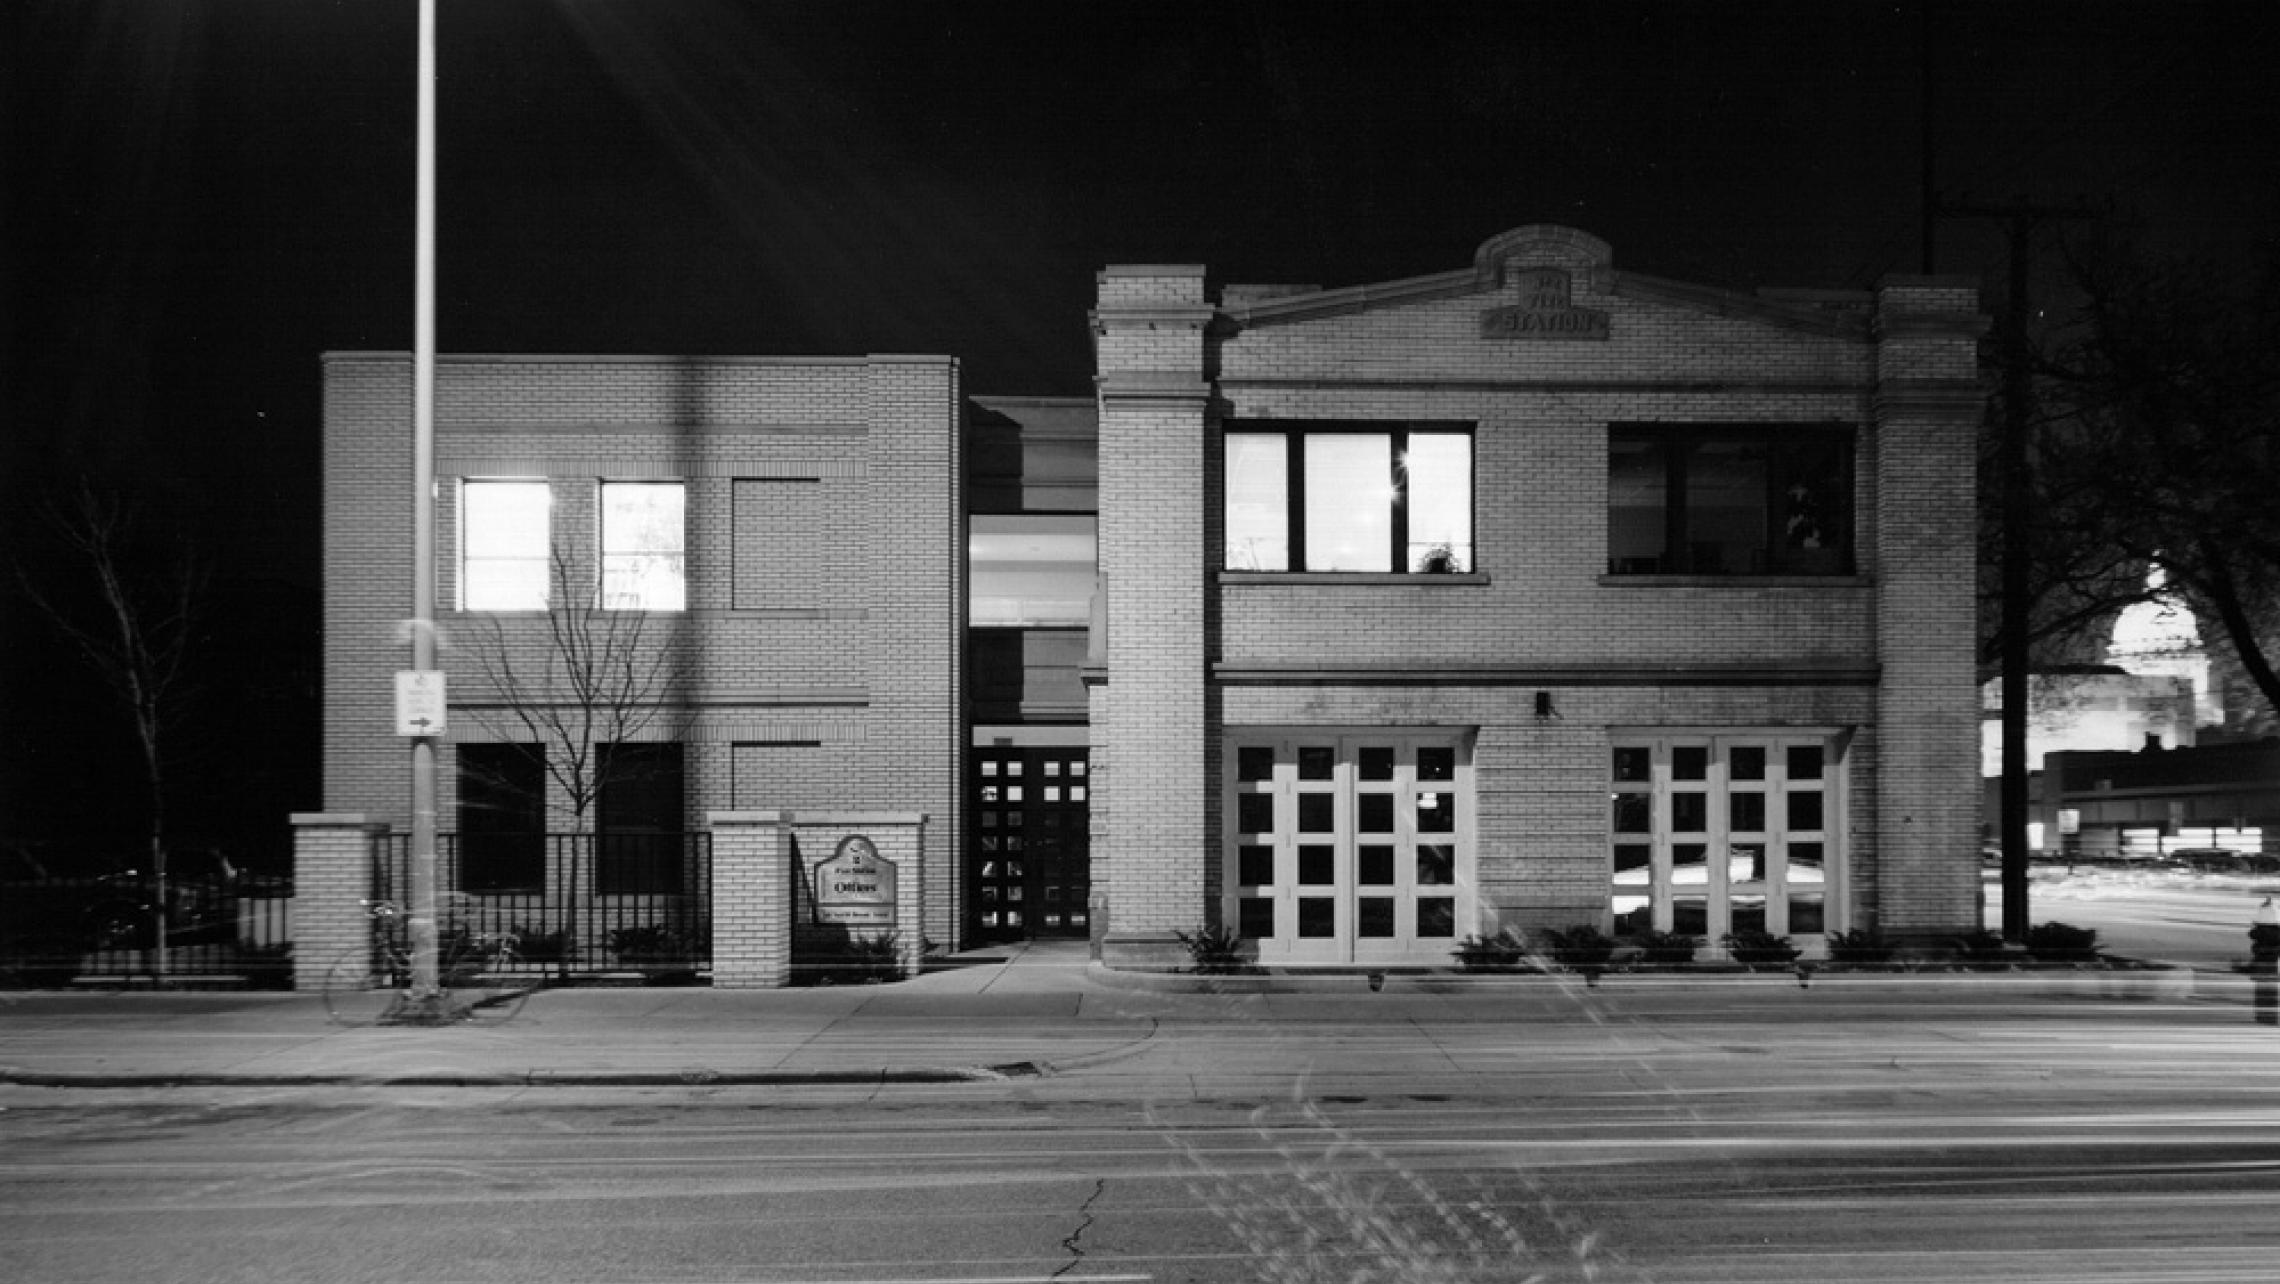 ULI Fire Station Number 2 - Black and White